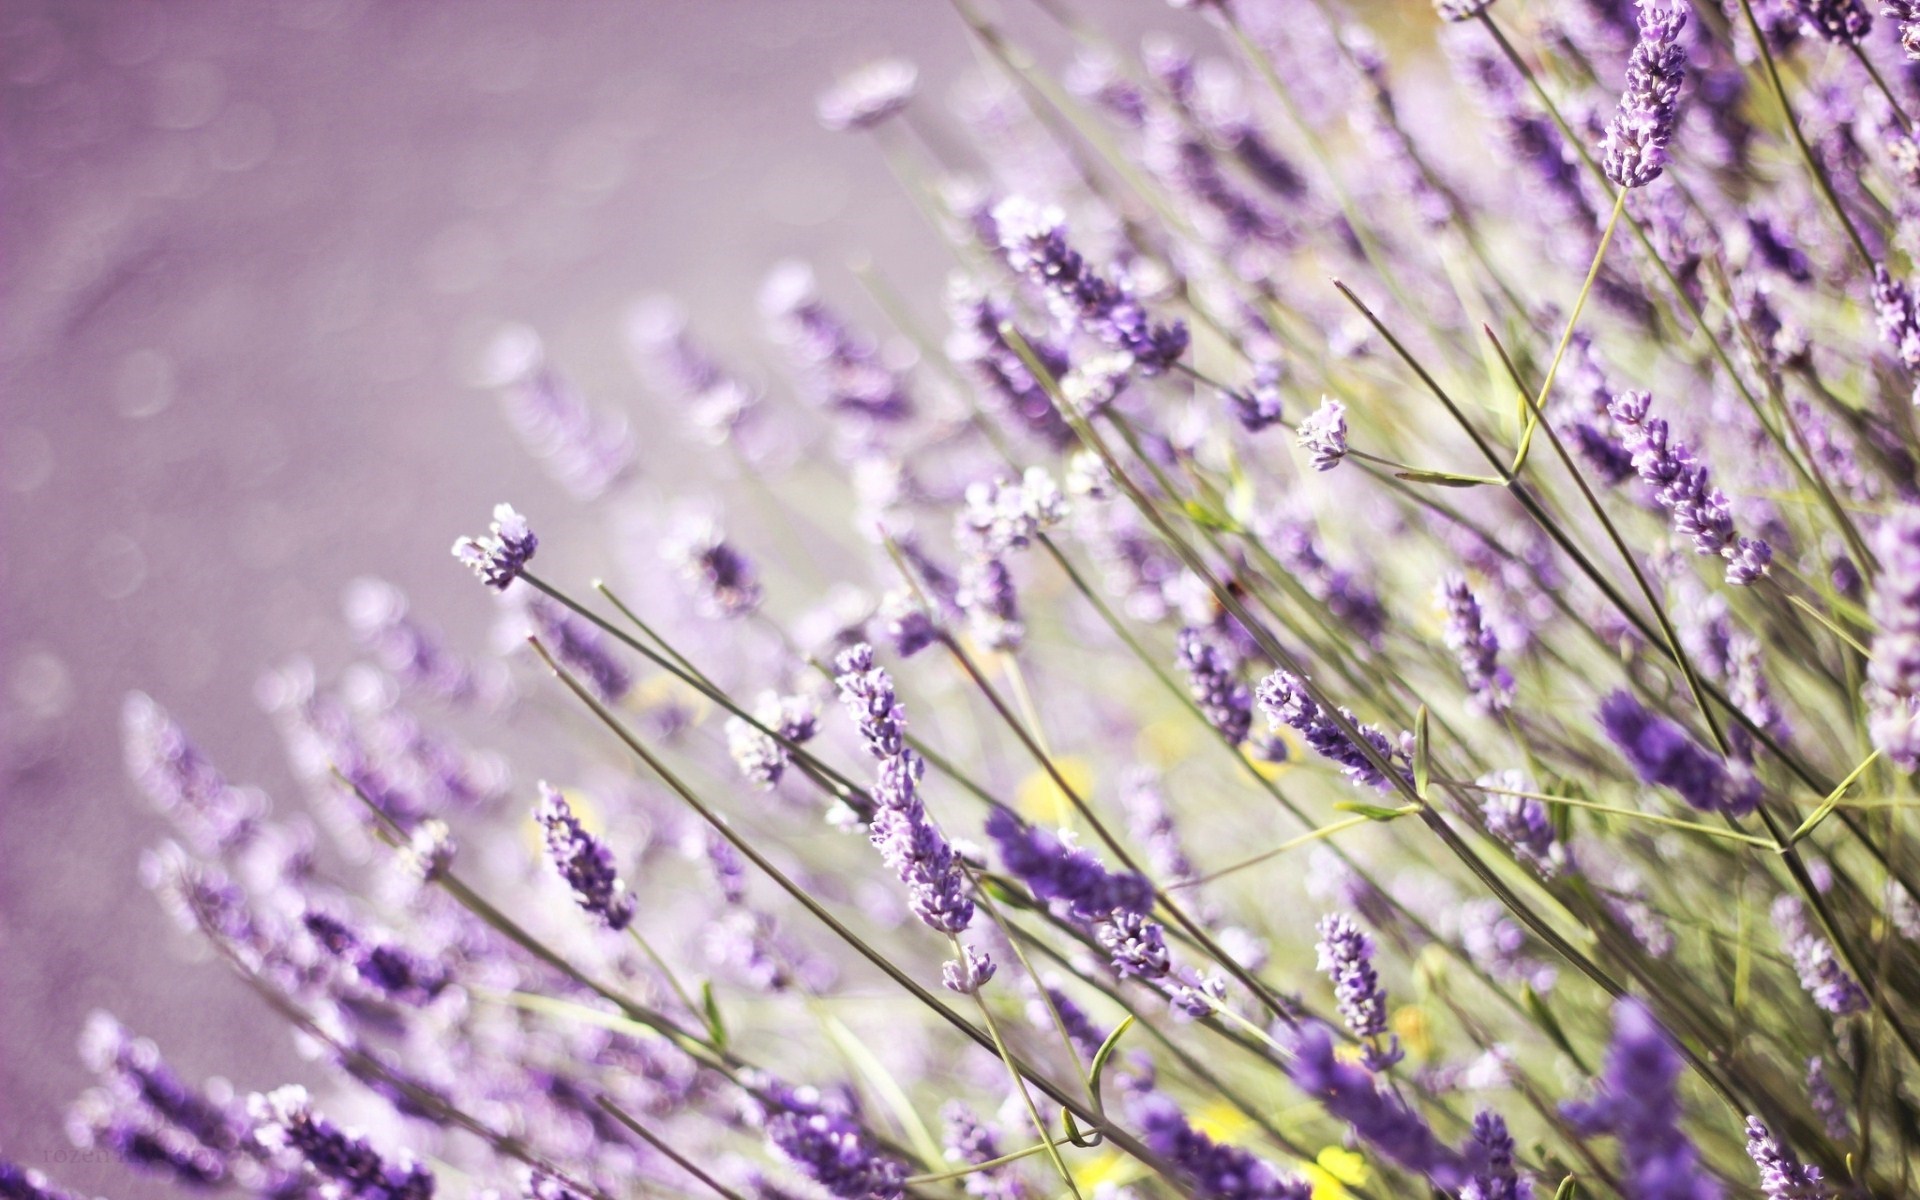 Lavender flower images and wallpapers Download